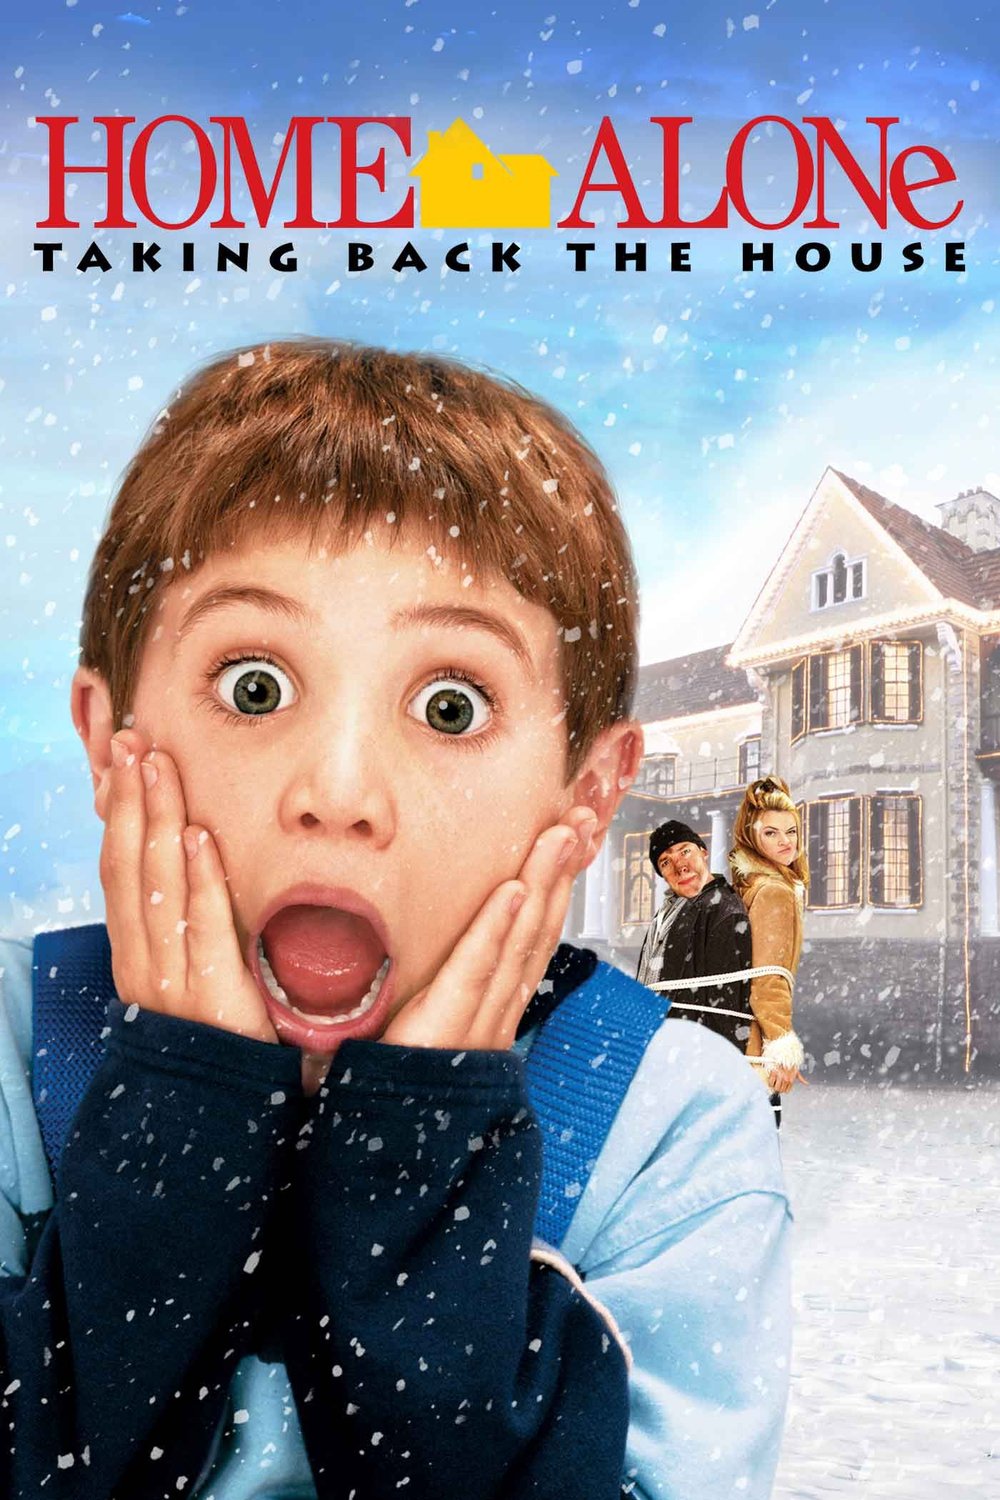 L'affiche du film Home Alone 4: Taking Back the House